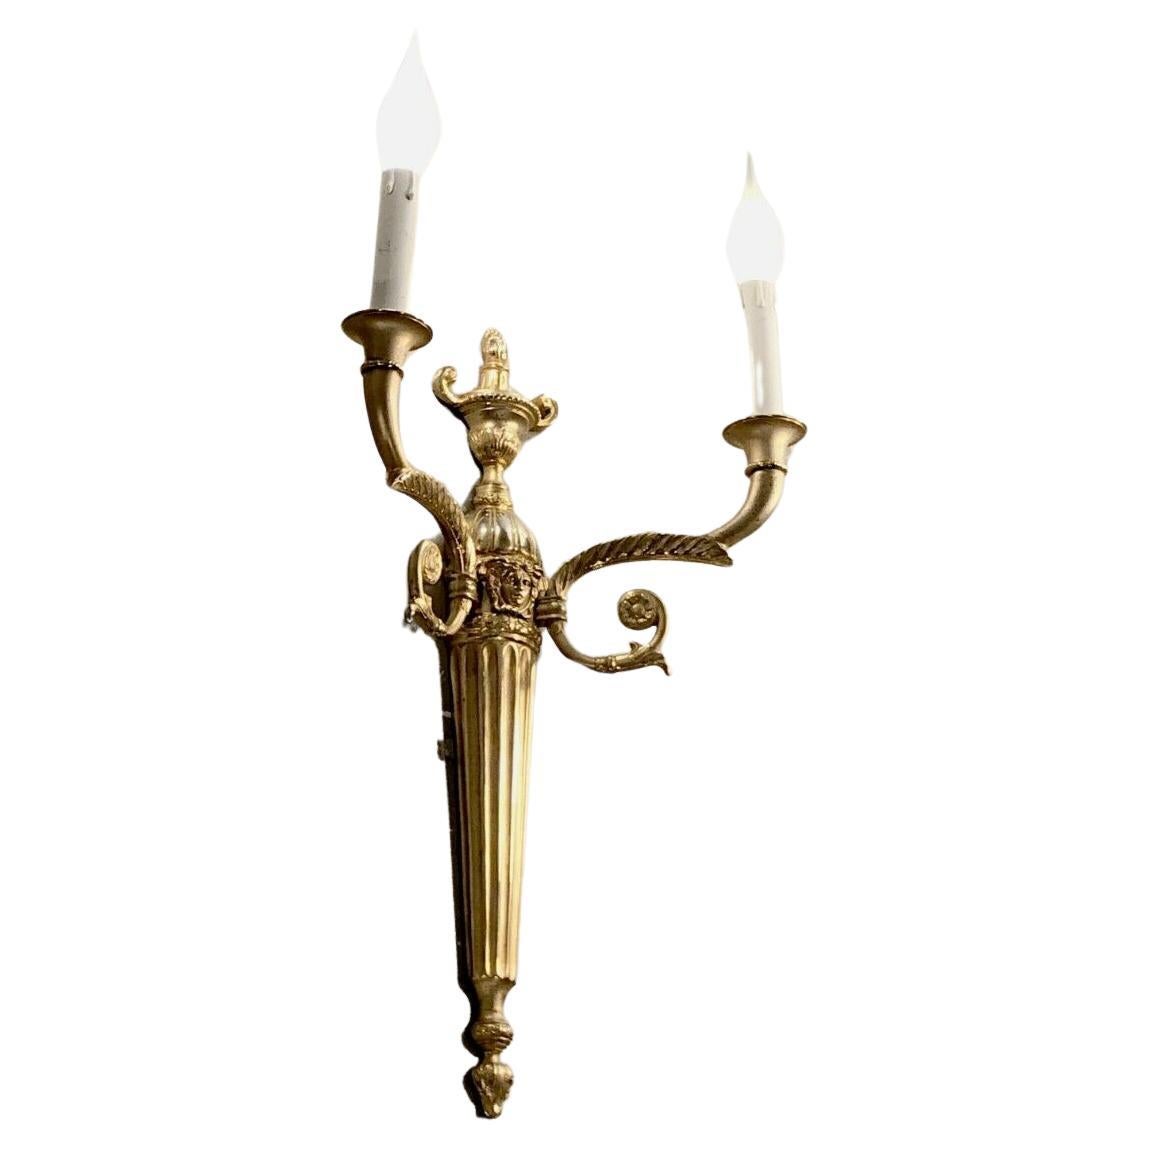 A NEO-CLASSICAL SHABBY-CHIC Bronze WALL APPLIQUE by GIANNI VERSACE, Italy 1990